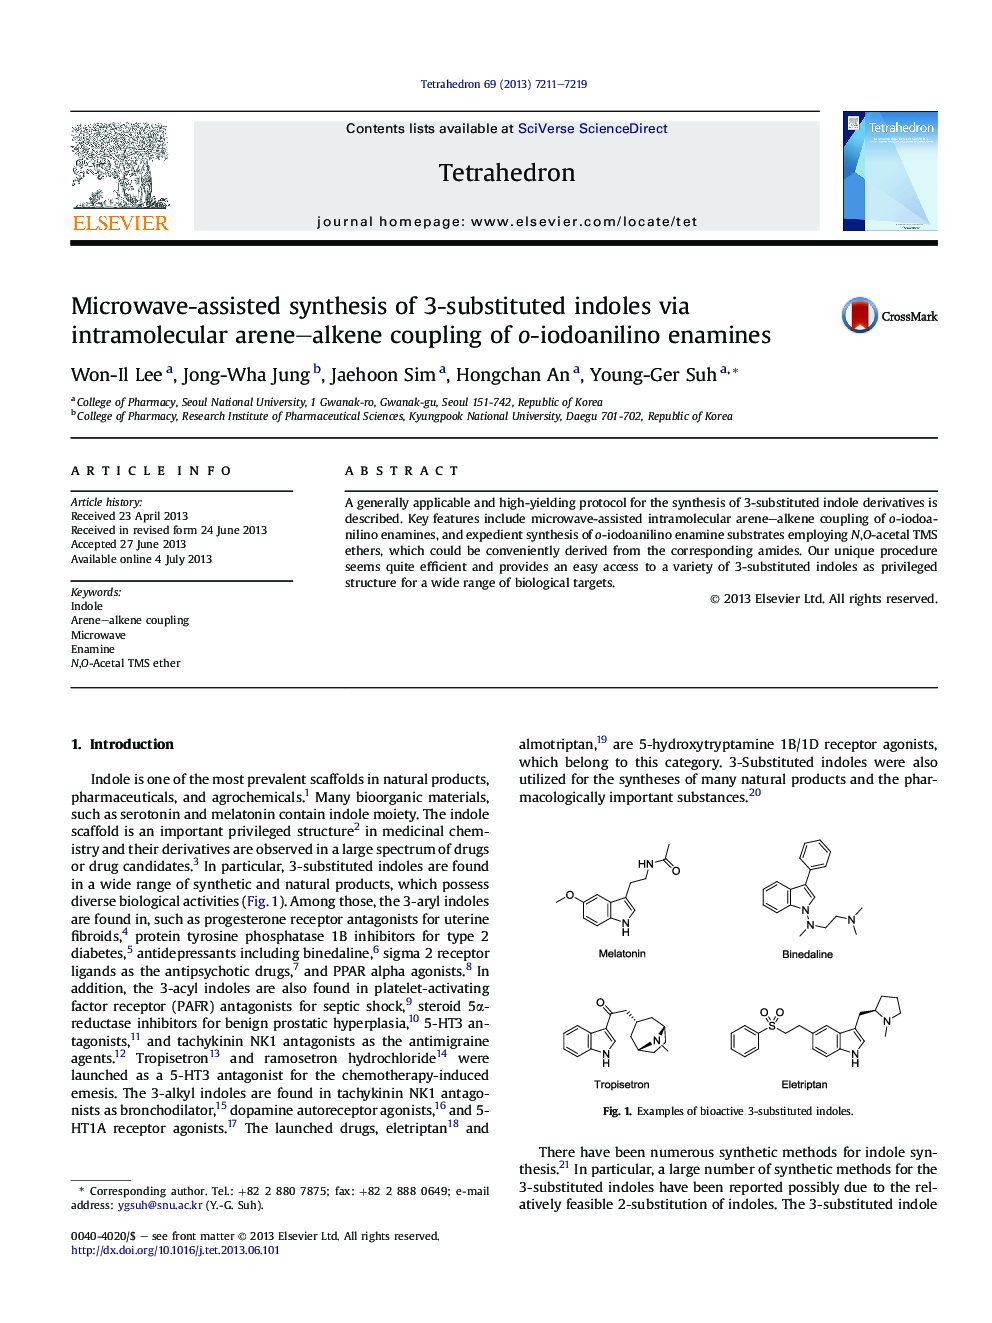 Microwave-assisted synthesis of 3-substituted indoles via intramolecular arene-alkene coupling of o-iodoanilino enamines